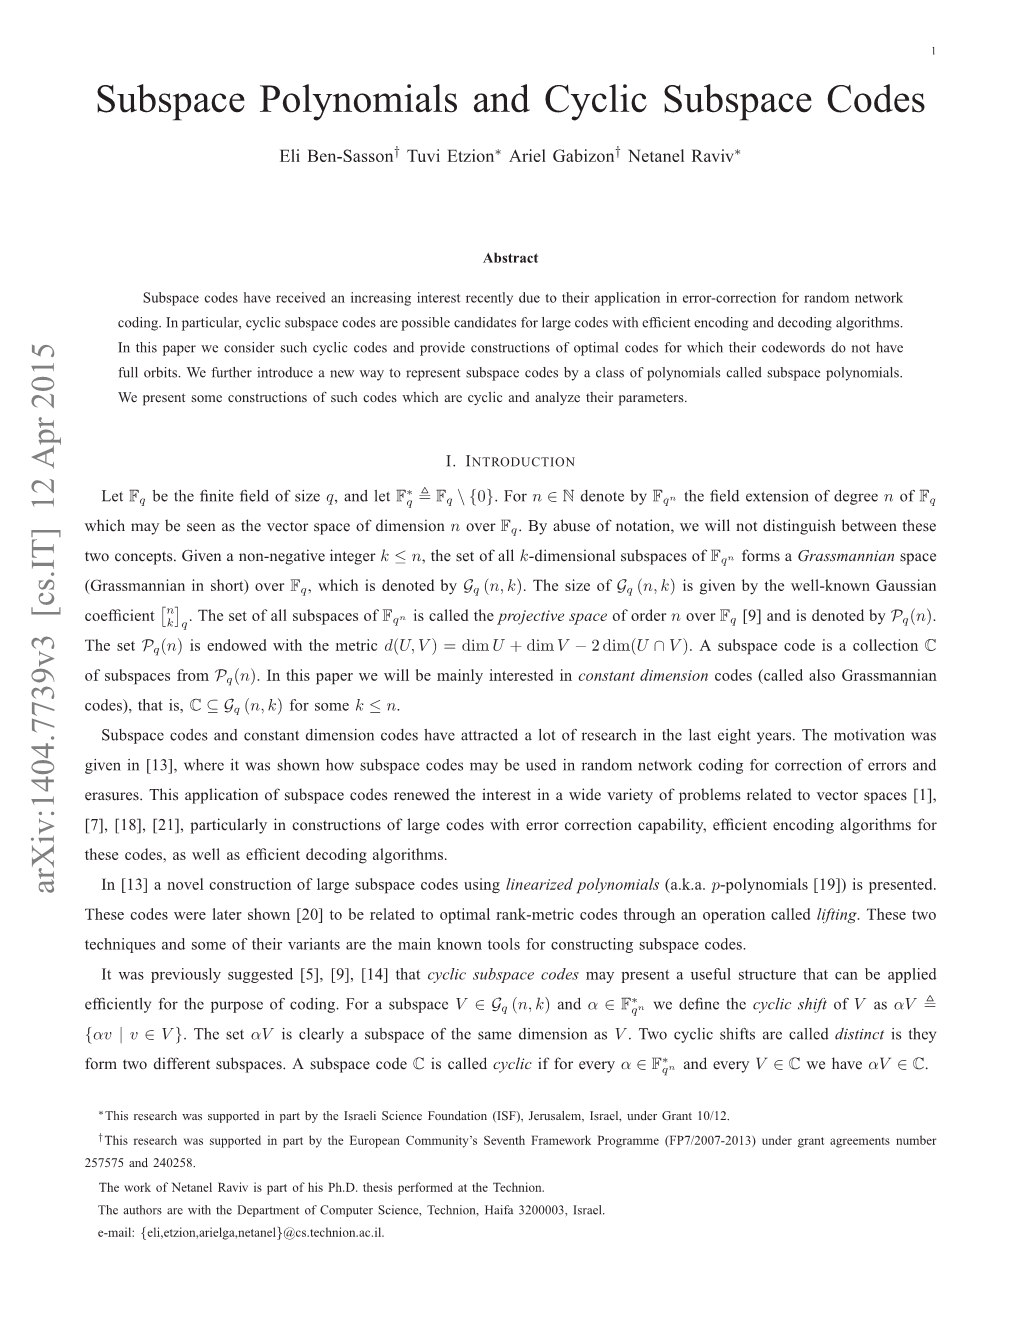 Subspace Polynomials and Cyclic Subspace Codes,” Arxiv:1404.7739, 2014